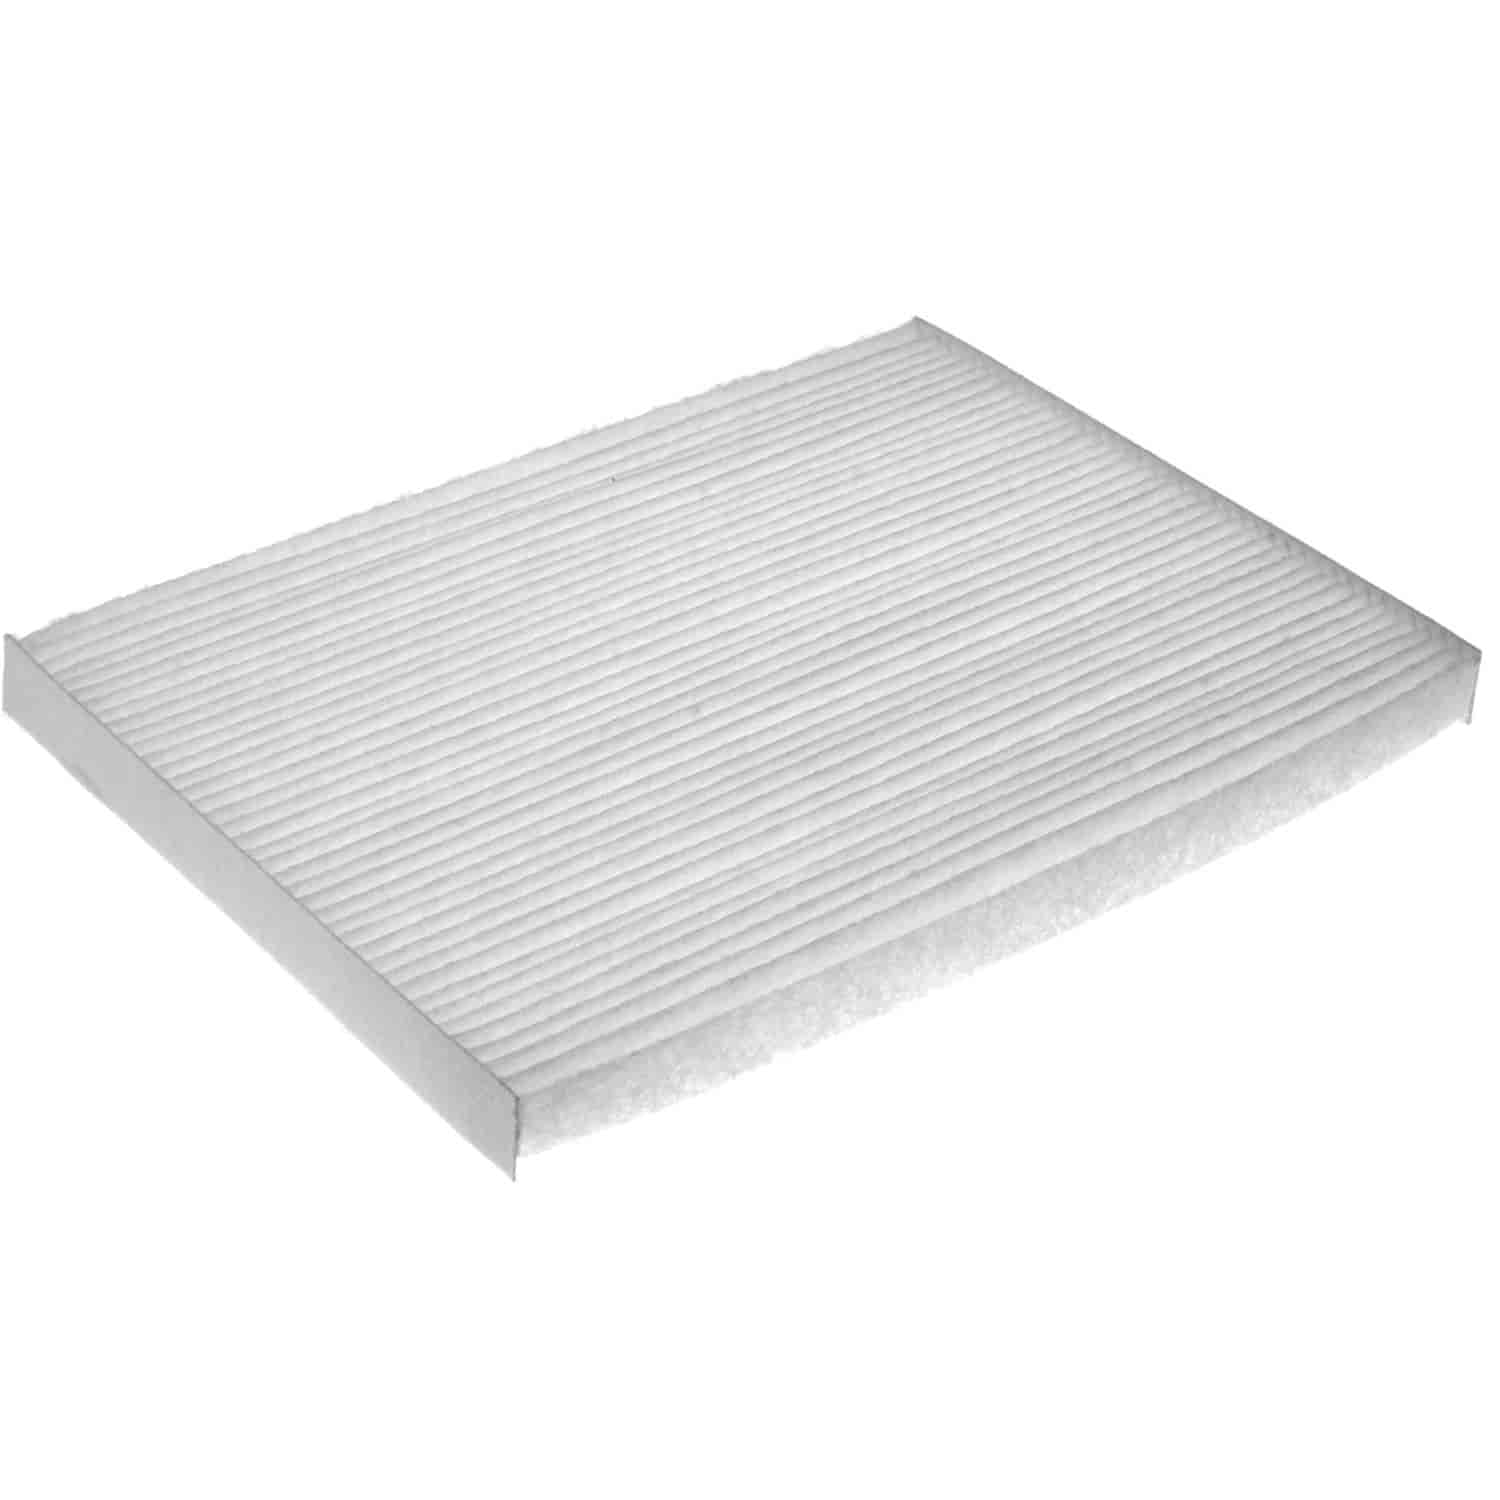 Mahle Cabin Air Filter for Nissan fits Sentra 2.0L and 2.5L 2007-2009